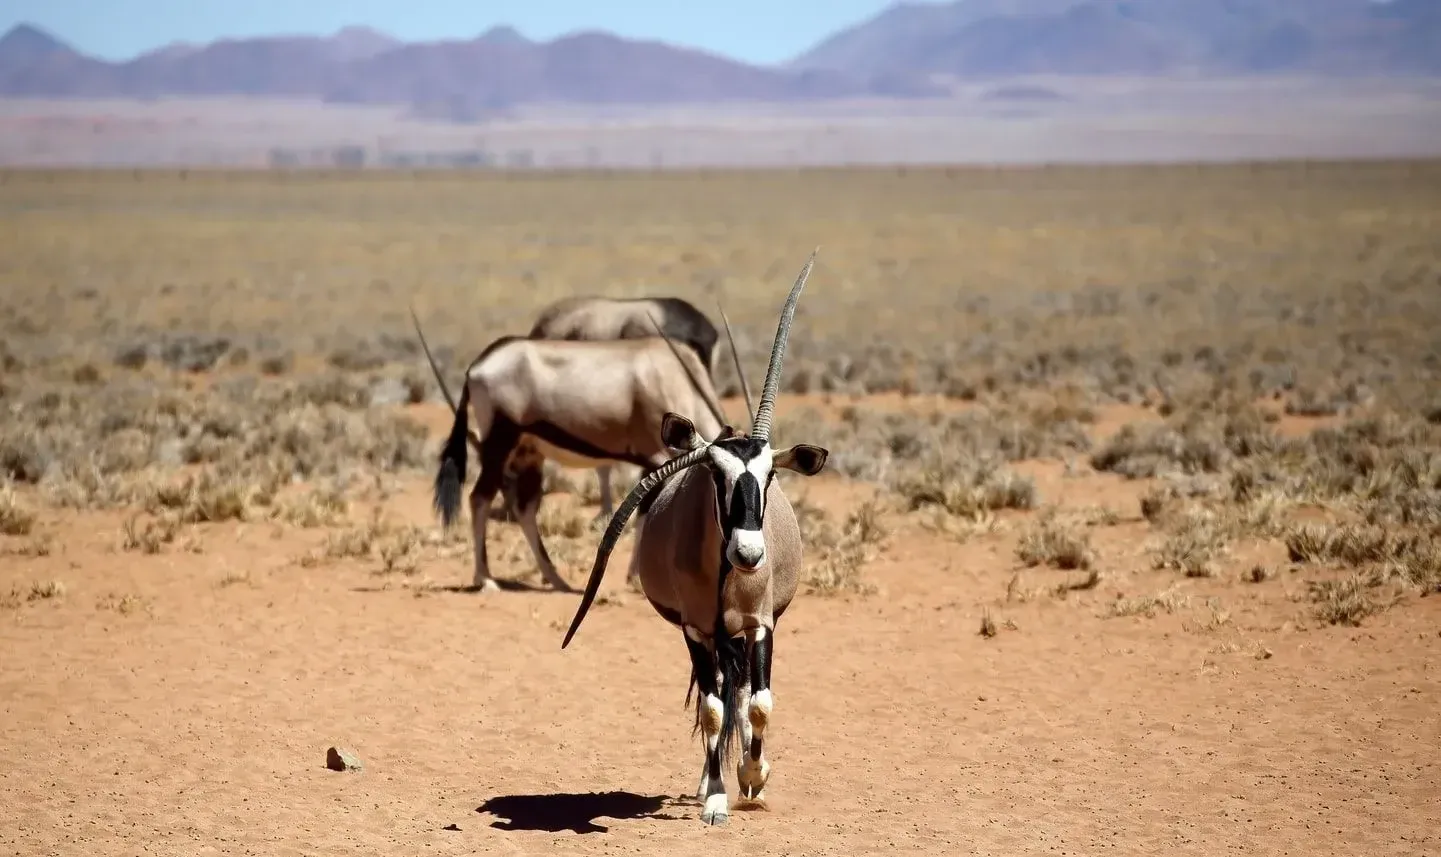 Gemsbok facts provide a lot of information about gemsbok and Oryx animals.